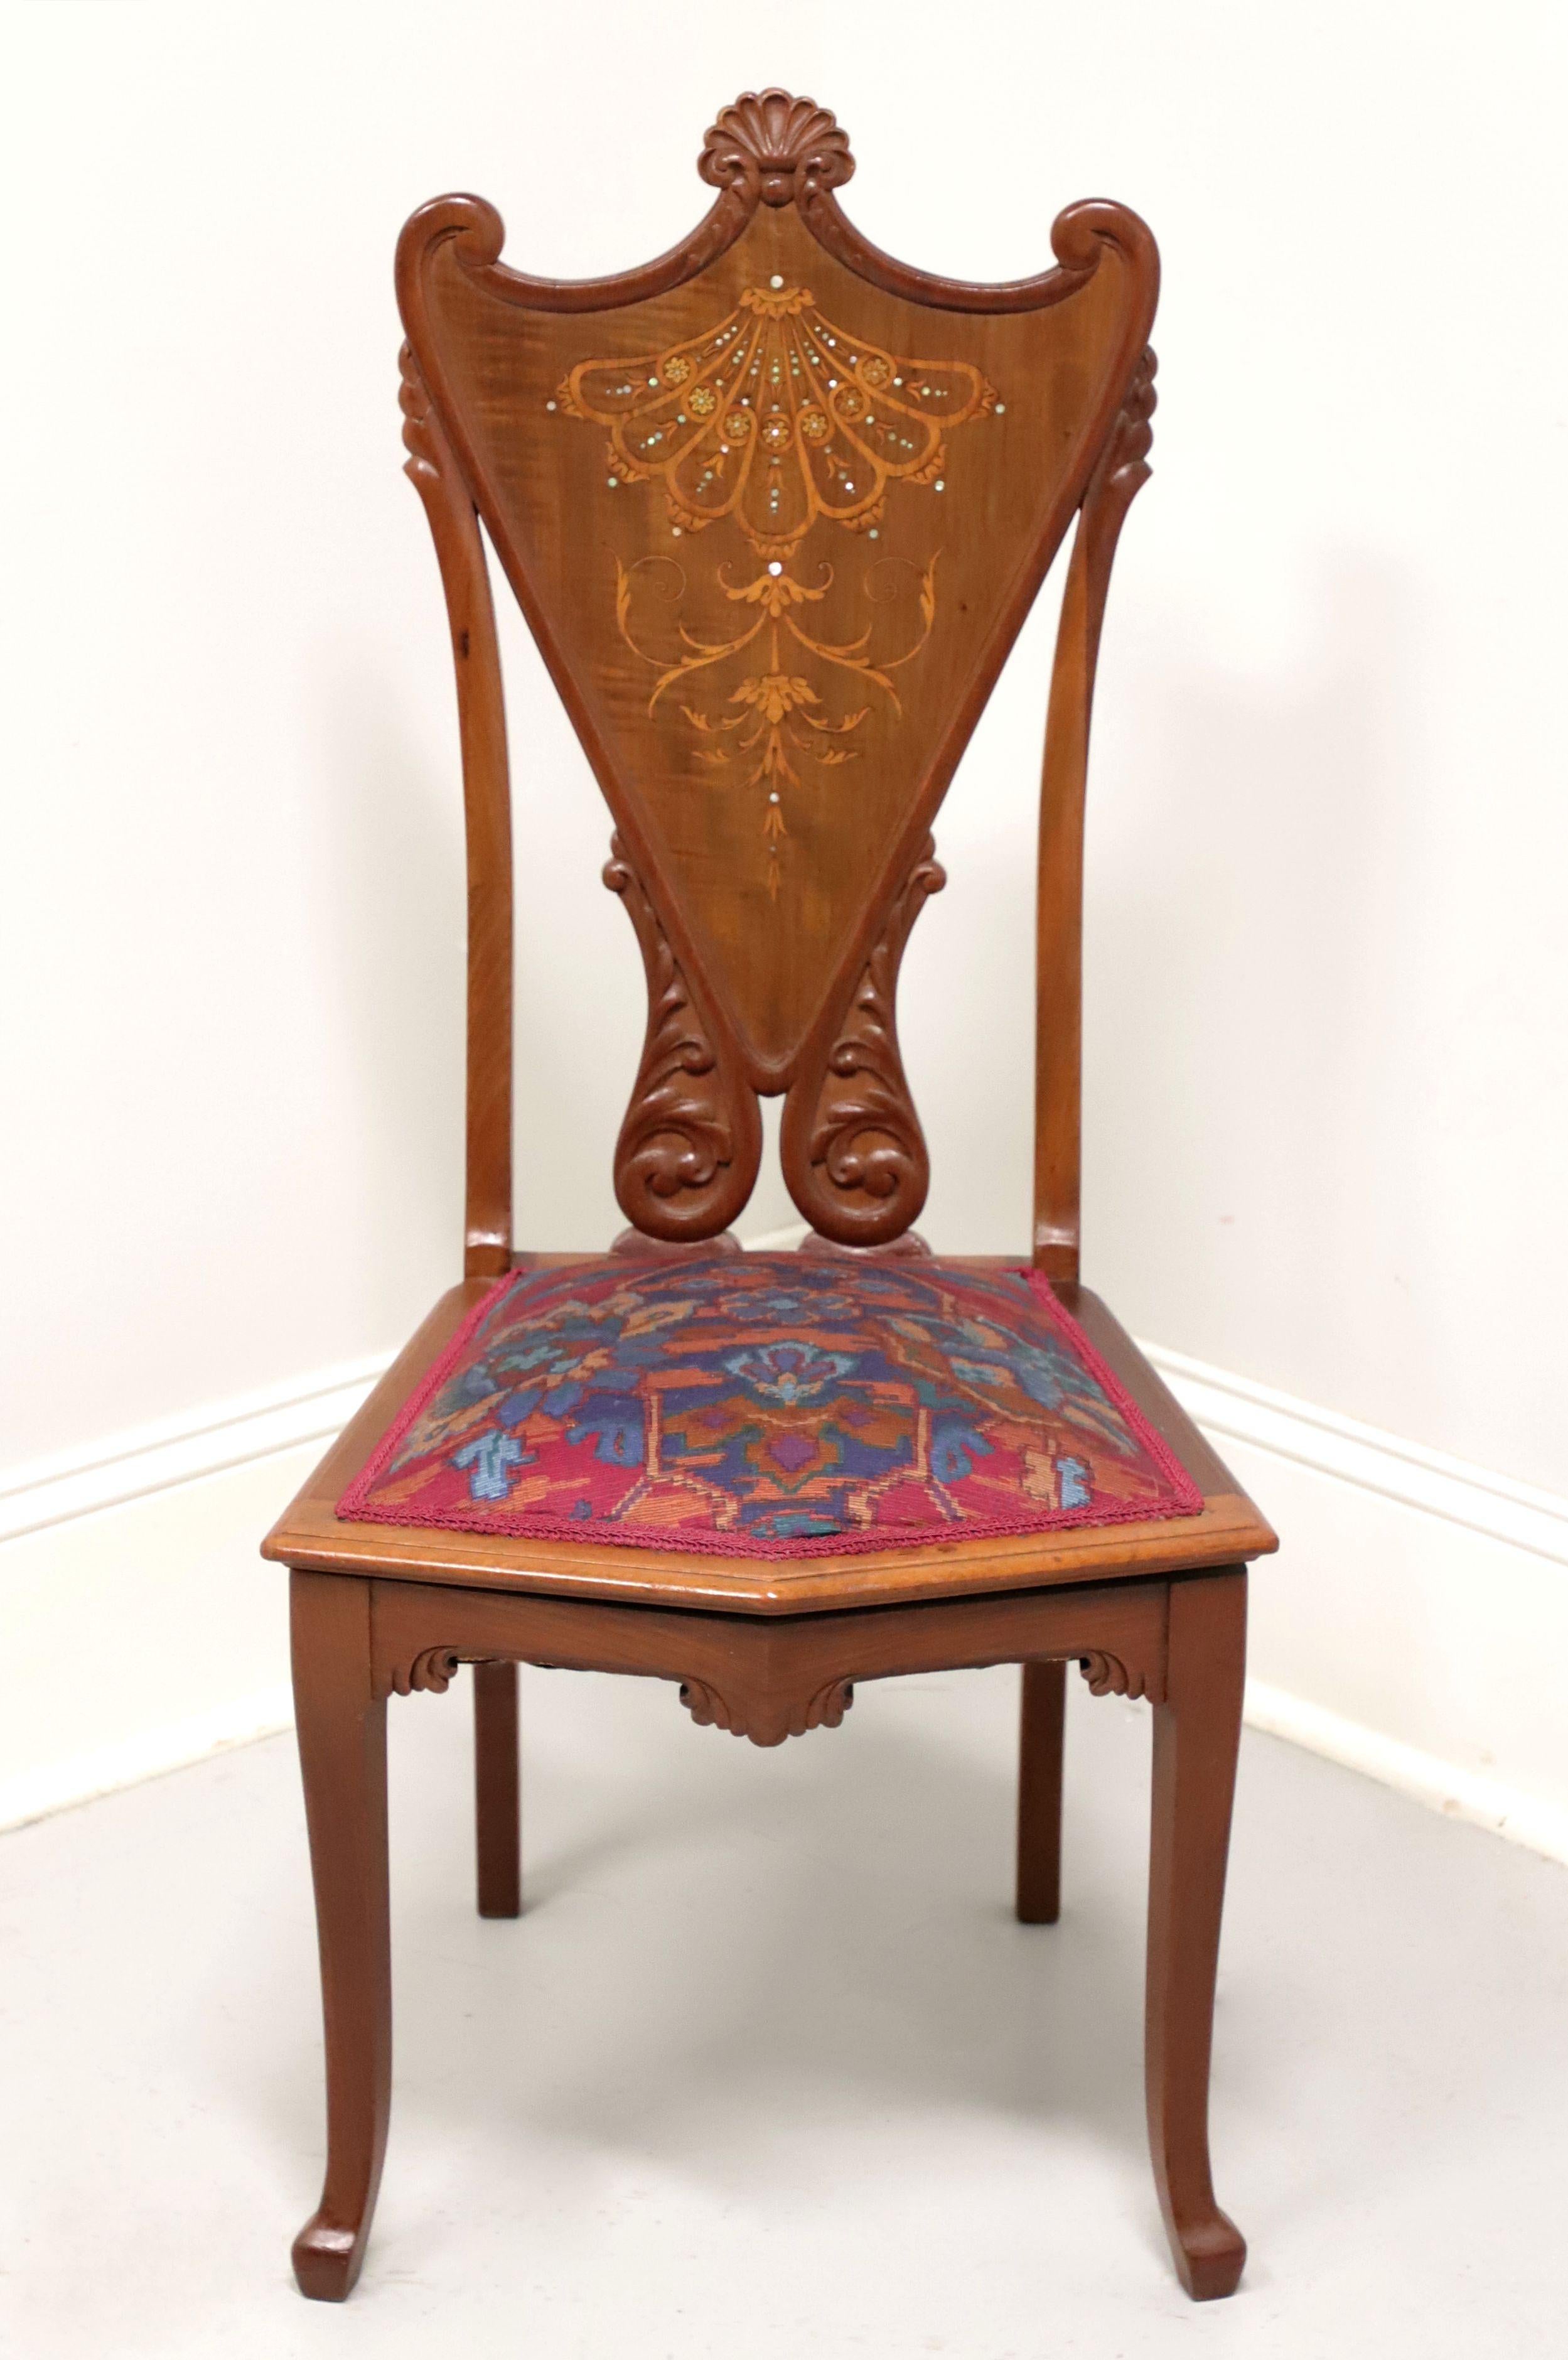 An antique Victorian style side chair, unbranded. Hand carved & crafted of walnut with mother of pearl inlays, decoratively carved shield back, upholstered seat in a multi-color cross stitch fabric, carved apron, slightly curved front legs and pad